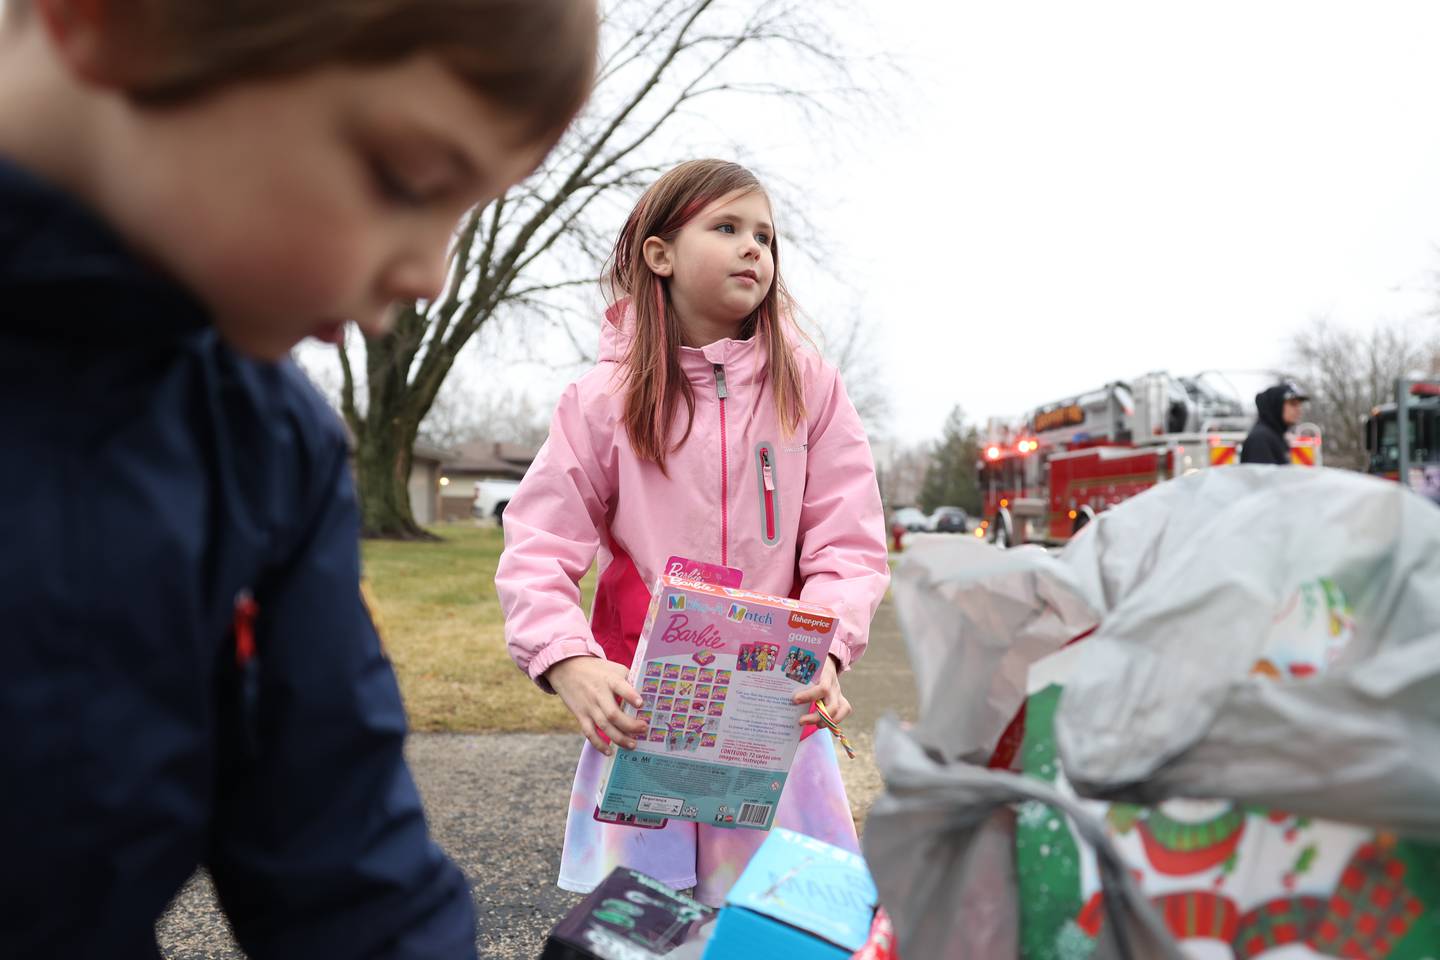 Alexa Jenicek, 8, holds a Barbie doll donated by the non-profit charity Lockport Love. The Jenicek family was one of seven families that received gifts from the non-profit Lockport Love charity on on Saturday, Dec. 10, 2022, in Lockport.